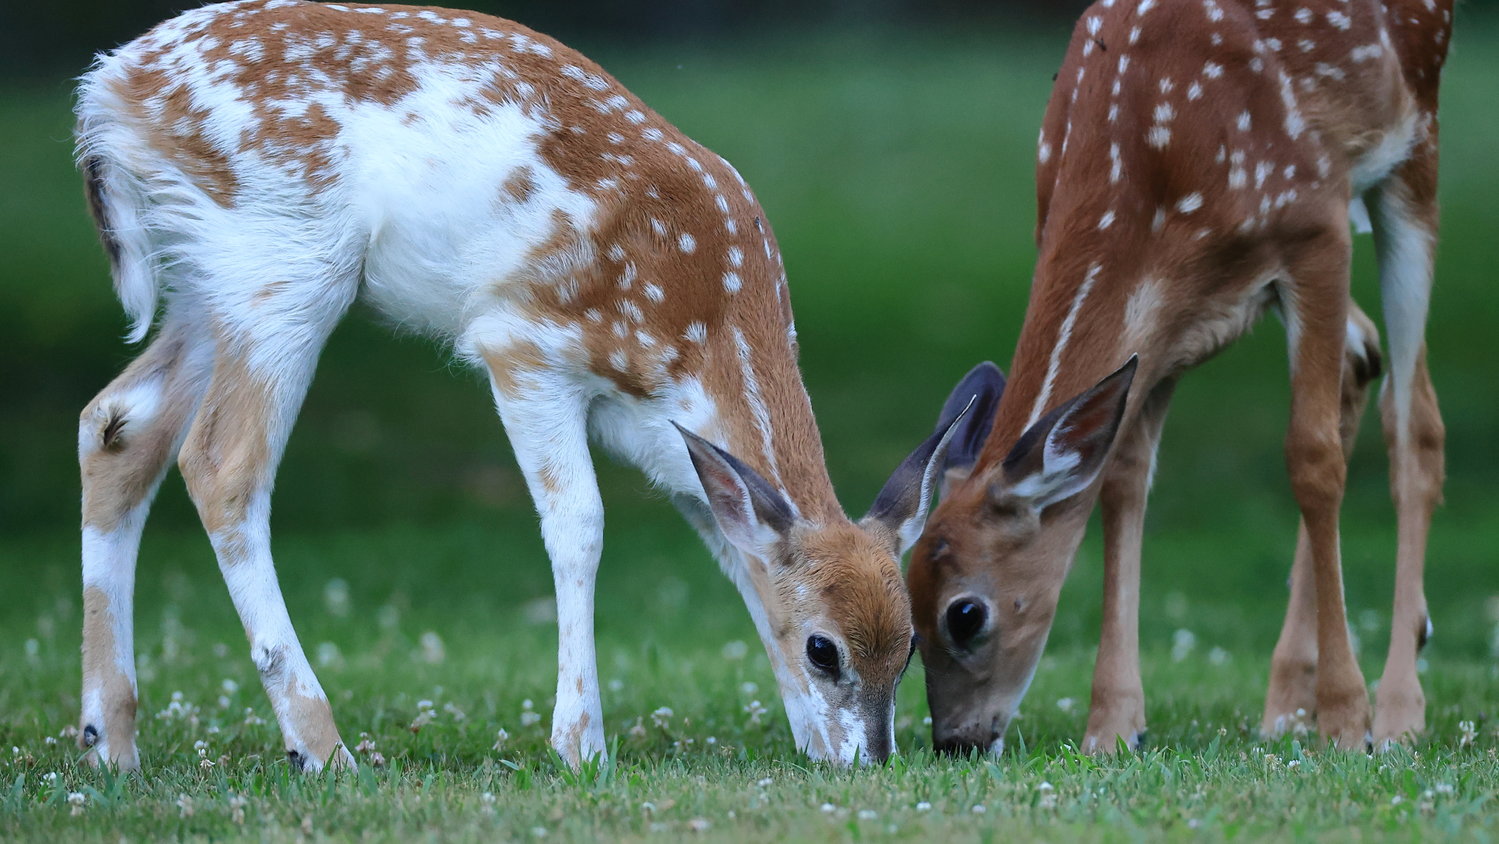 These adorable twin fawns, one of which is affected by leucism and is partially white, posed for me in the Narrowsburg, NY area recently.....